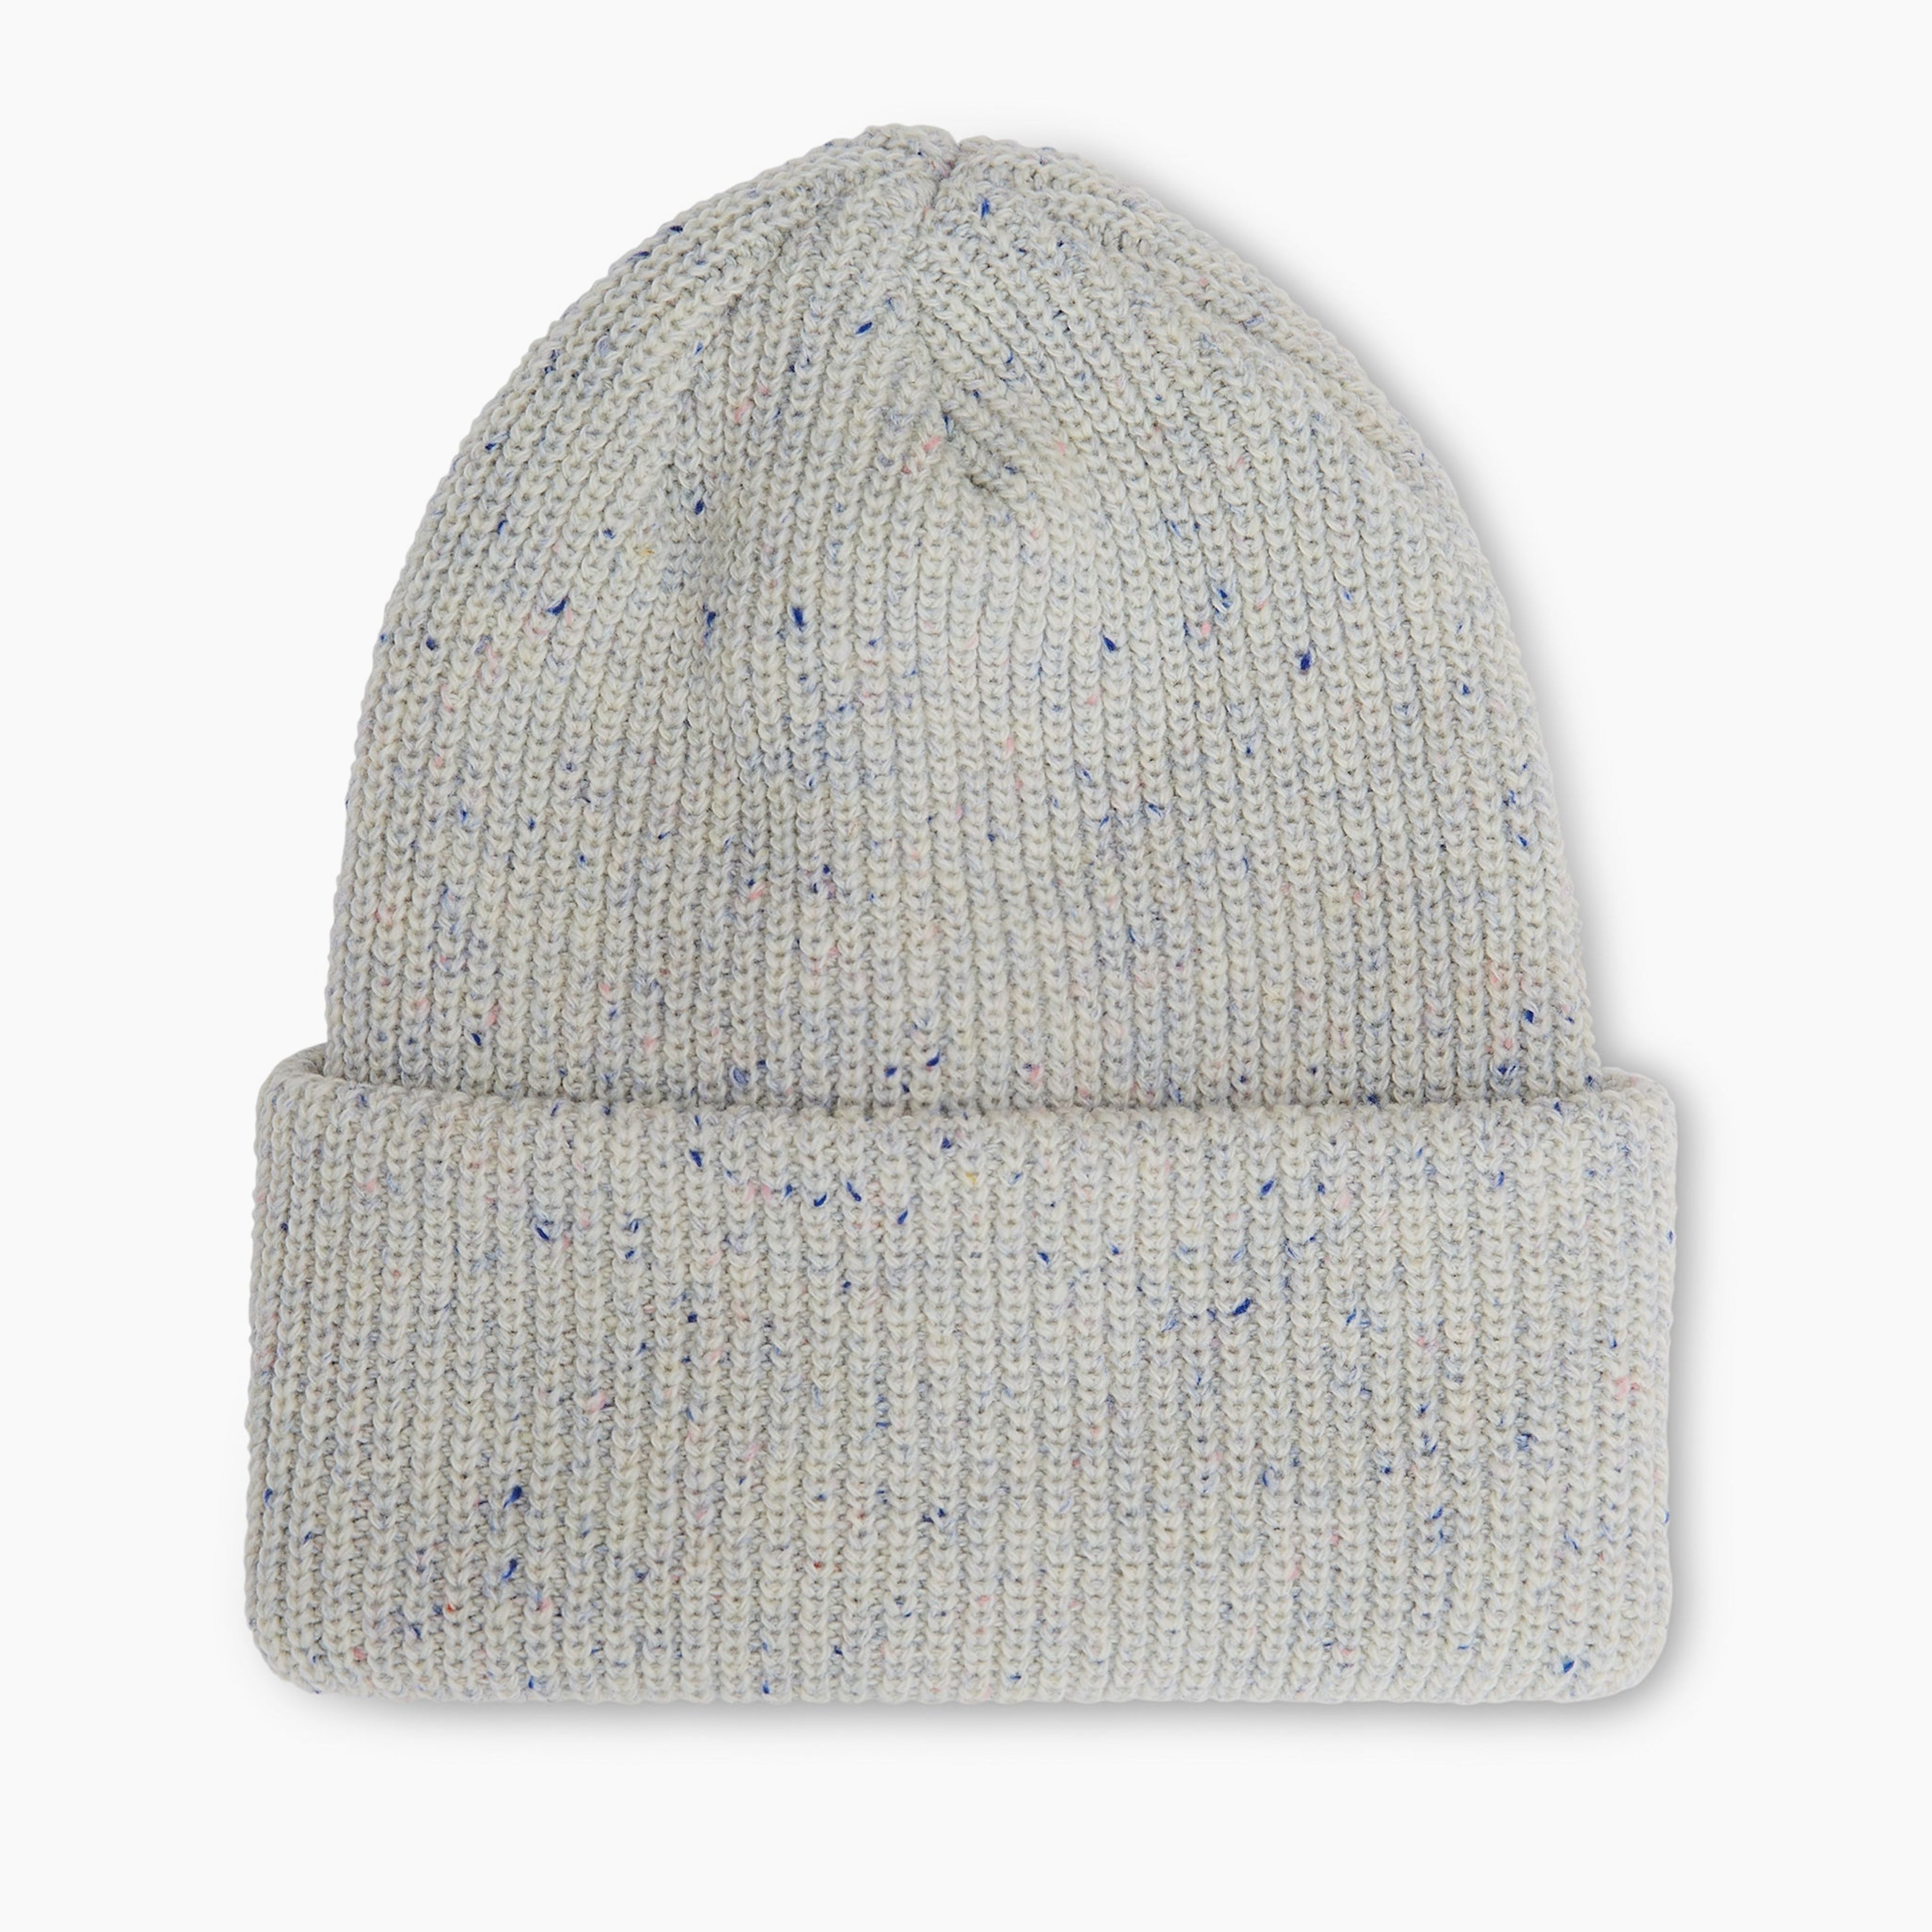 Pilgrim Surf + Supply Cashmere & Lambswool Blend Ribbed Hat - Icicle